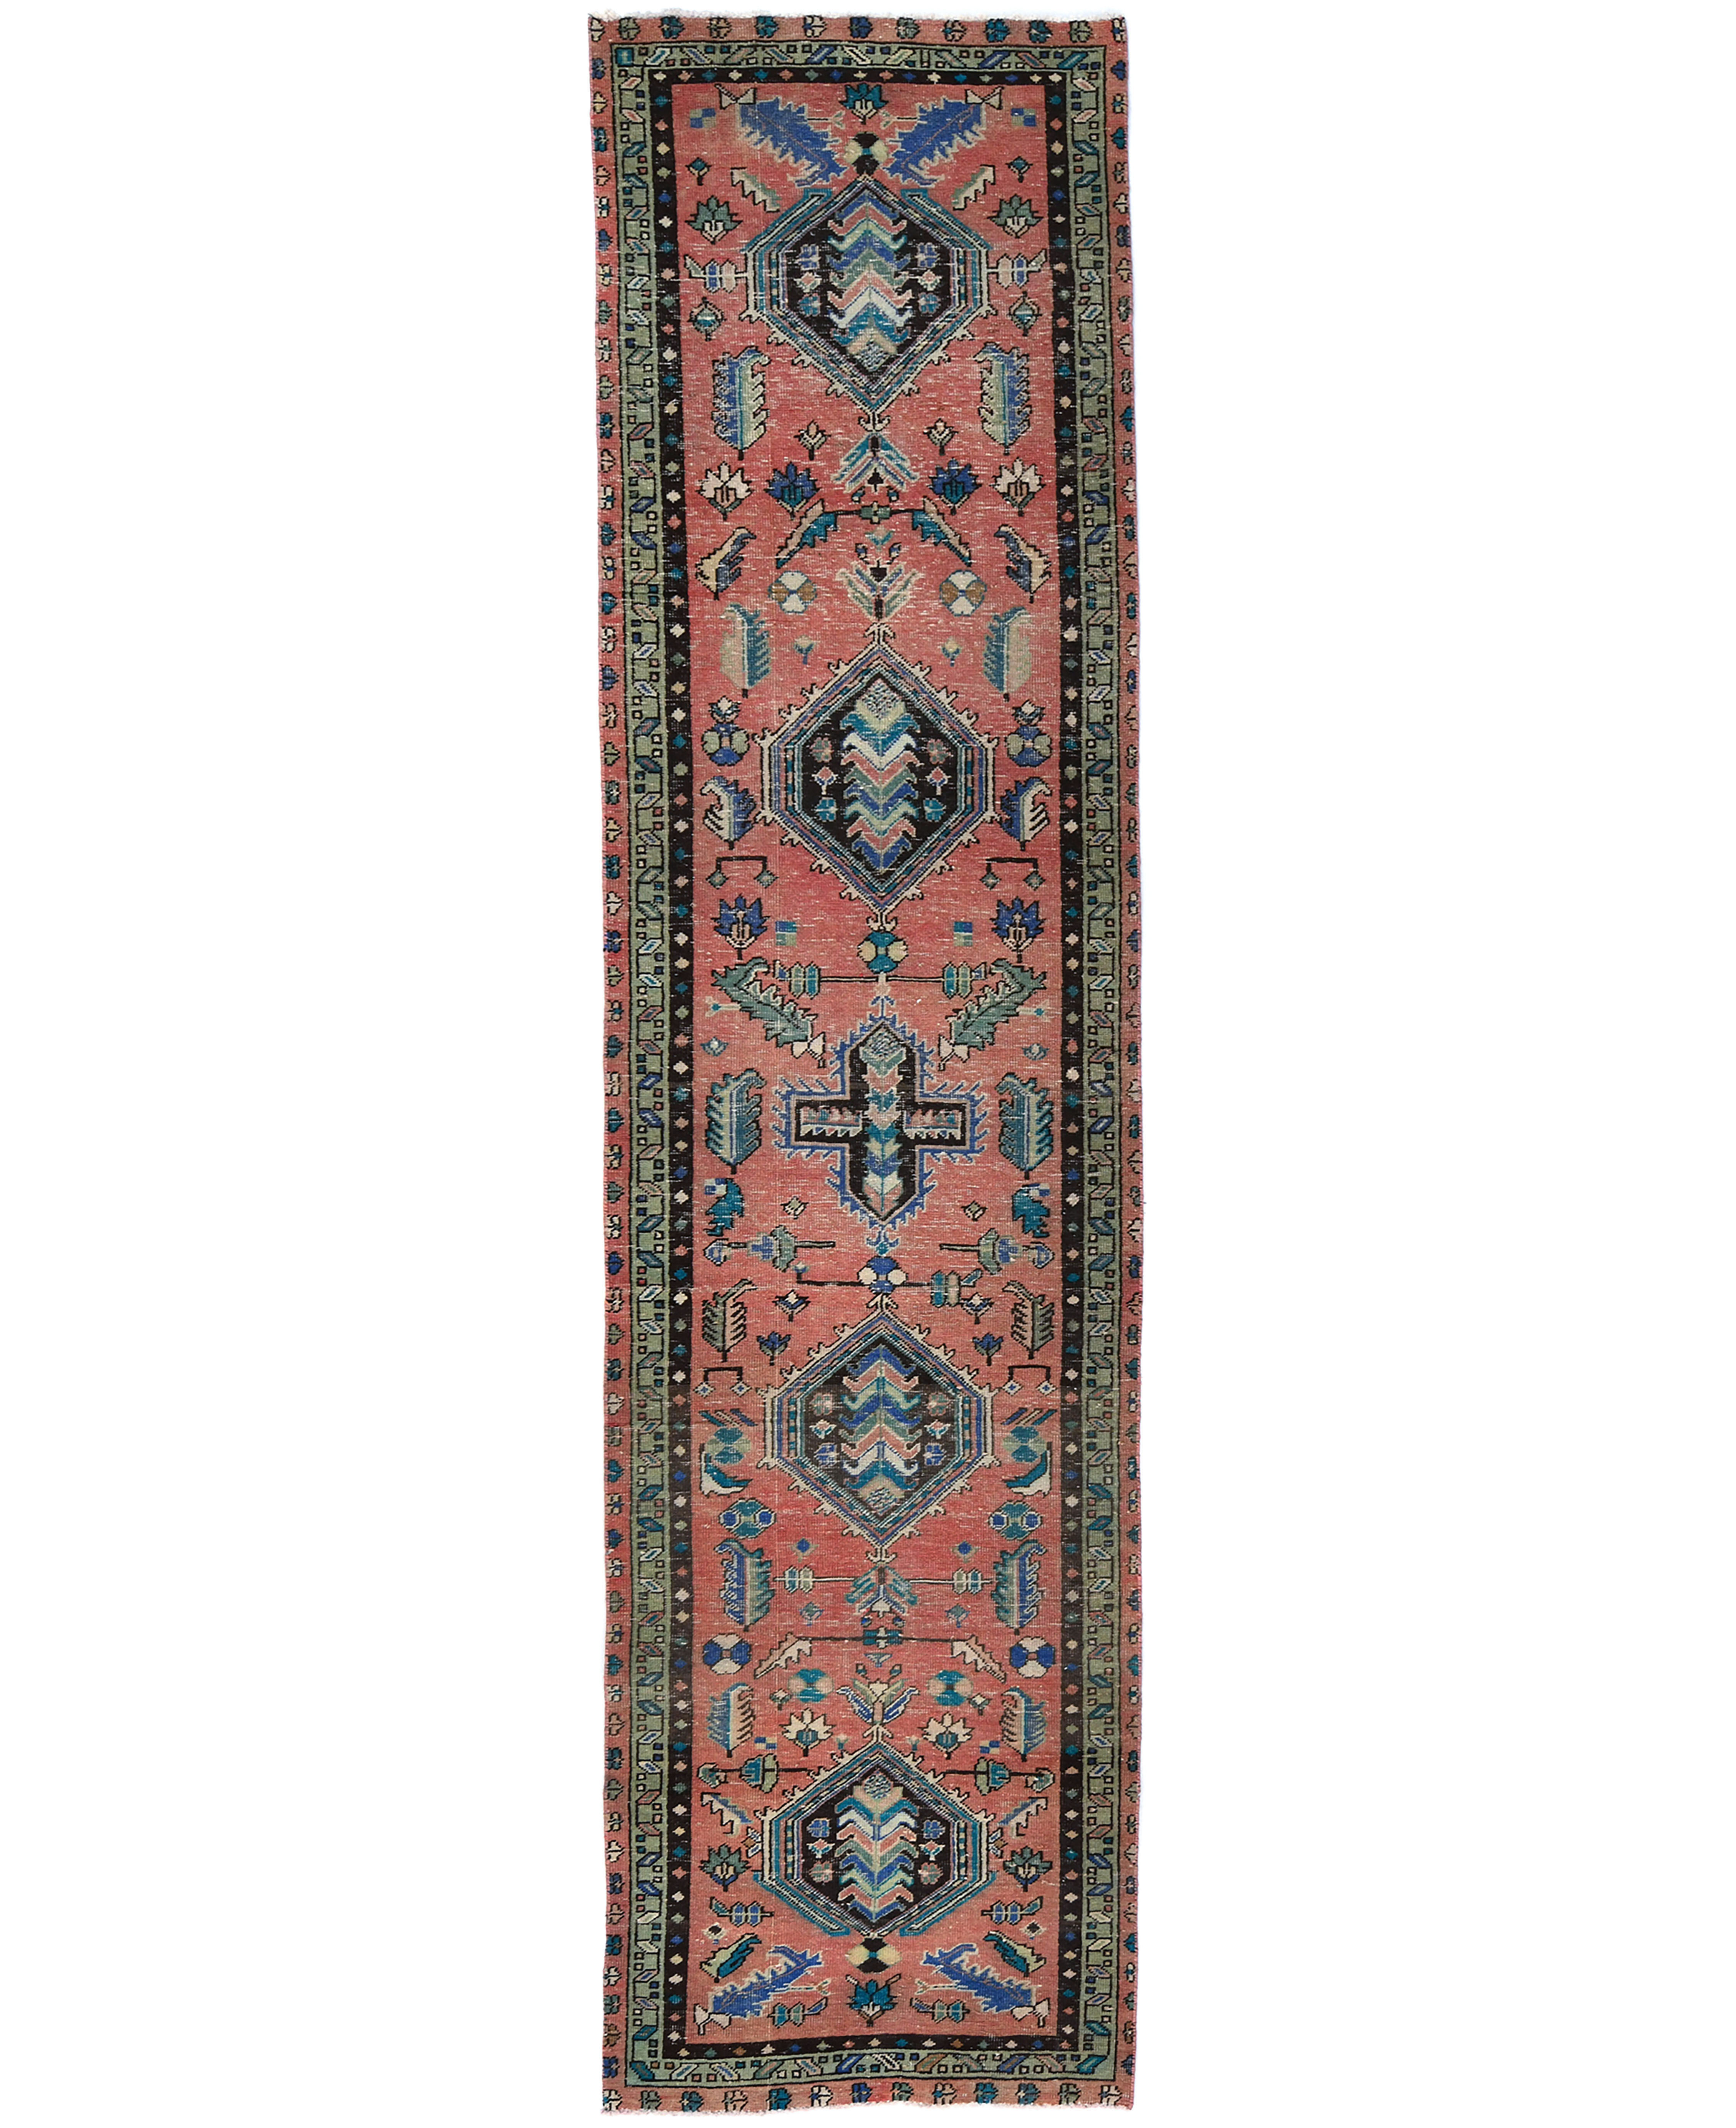 https://magicrugs.com/storage/import-products/rt-6082-1-2.JPG